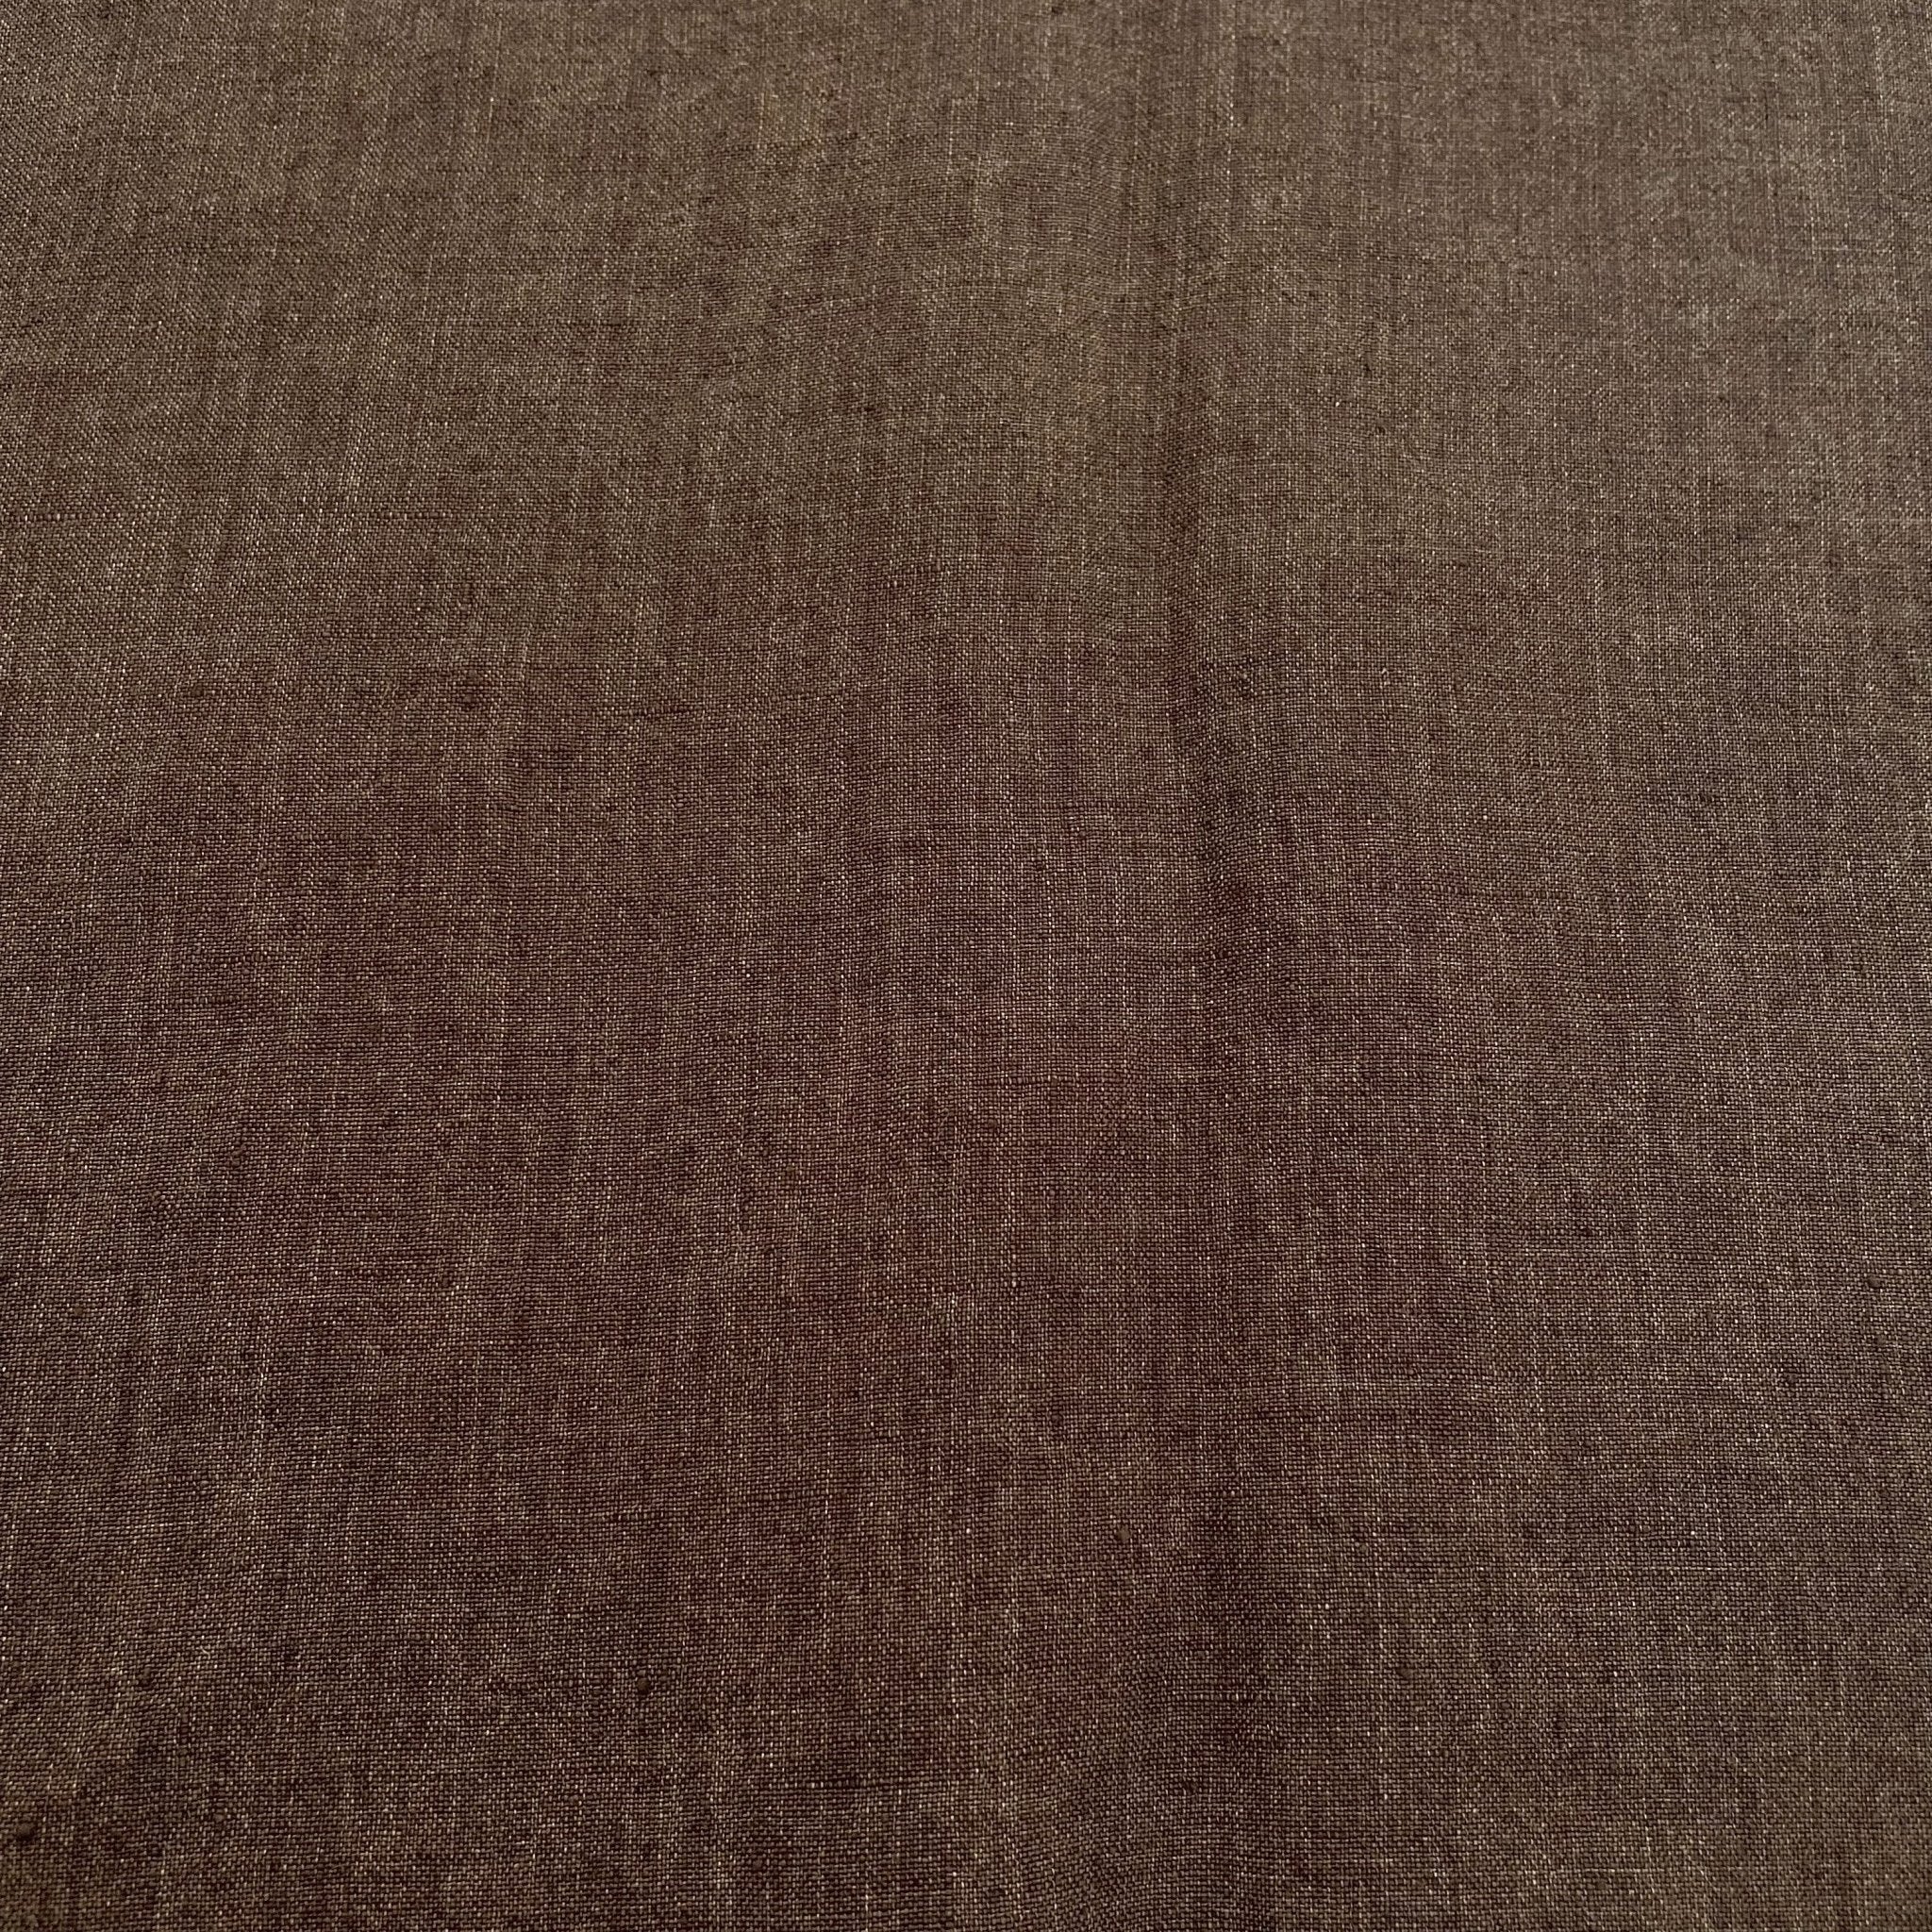 HIGH TWISTED LINEN FABRIC 6373 6374 6562 6311 6769 6863 - The Linen Lab - BROWN